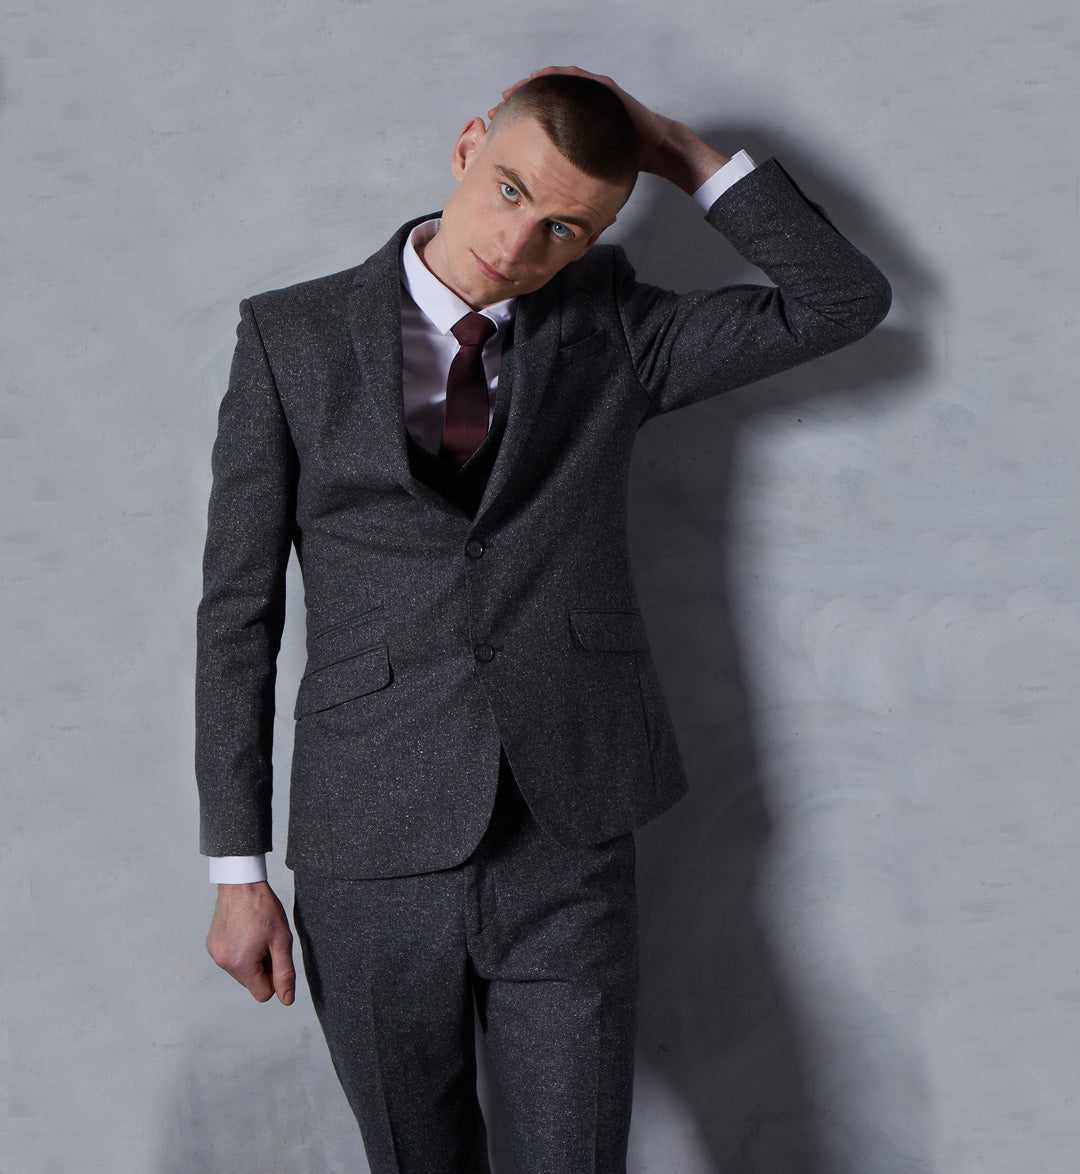 With a look all of its own in grey fleck tweed, the Shibden suit on the homepage of the Tom Percy website is the outlier of the Holmfield heritage men's three piece suit collection. The traditional dark gray color pairs well with anything.